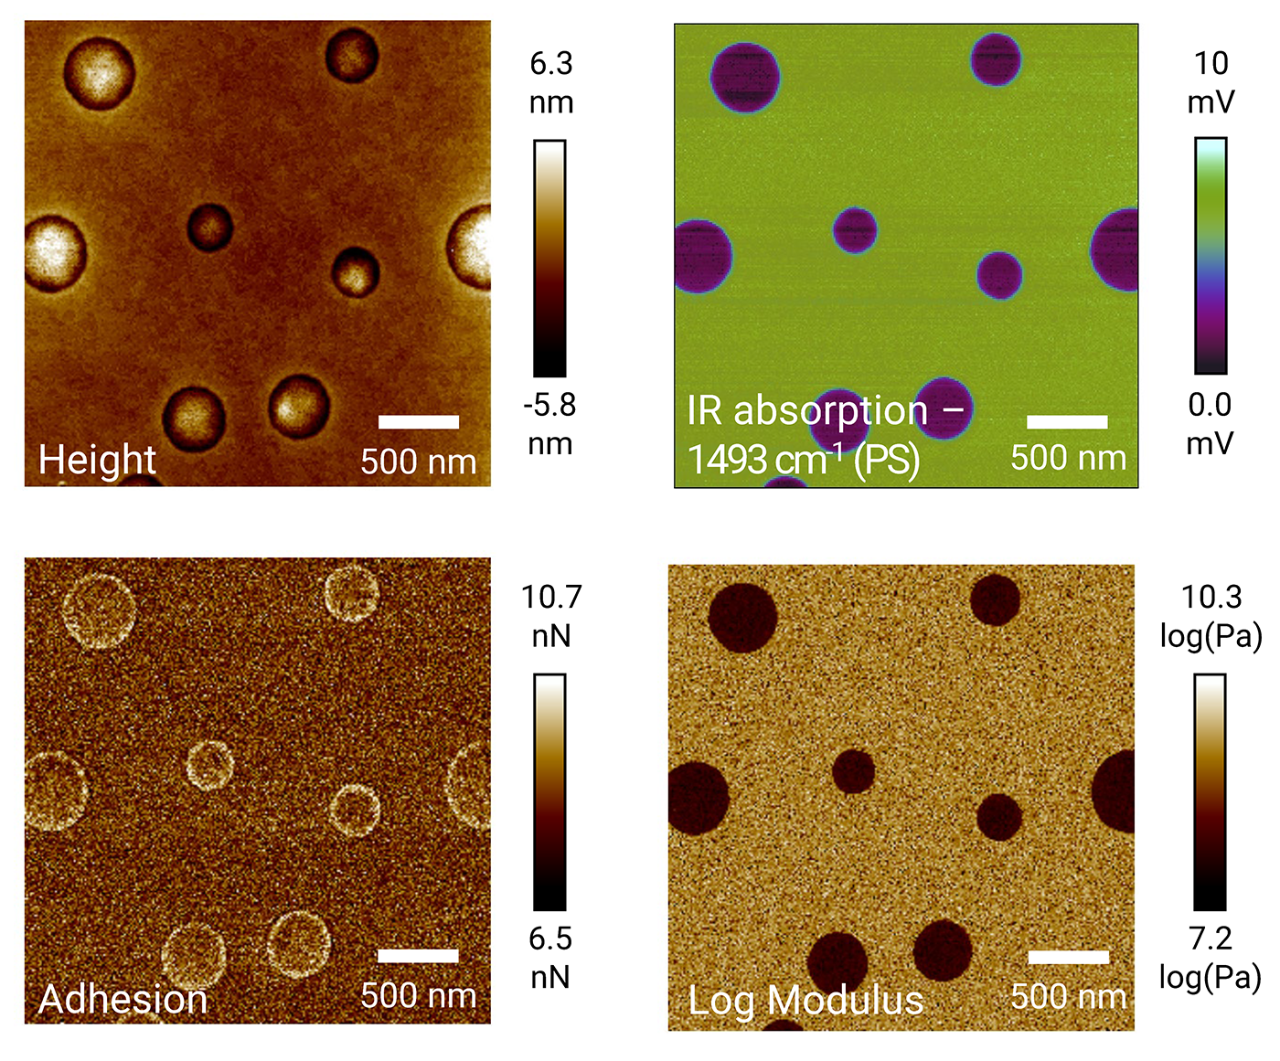 4-image panel showing height, IR absorption, adhesion, and log modulus maps of a PS-LDPE polymer blend